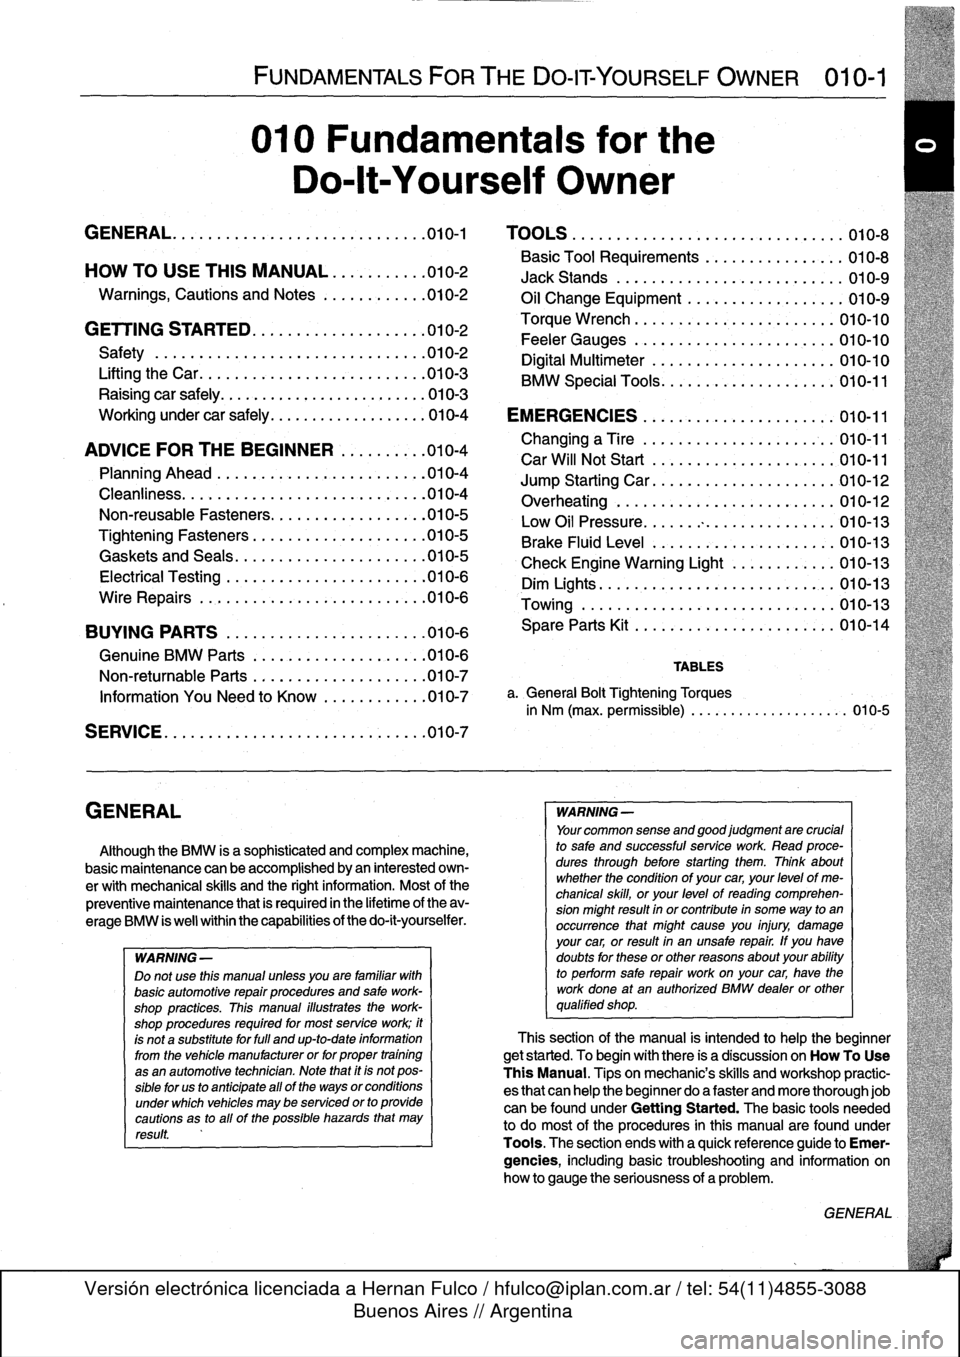 BMW 323i 1998 E36 Workshop Manual 
GENERAL

FUNDAMENTALS
FORTHE
DO-IT
YOURSELF
OWNER

	

010-1

010
Fundamentals
for
the

Do-lt-Yourself
Owner

GENERAL
.......
.
.
.
......
.
.........
.
.
.010-1

	

TOOLS
.
.
...
.
............
.
...